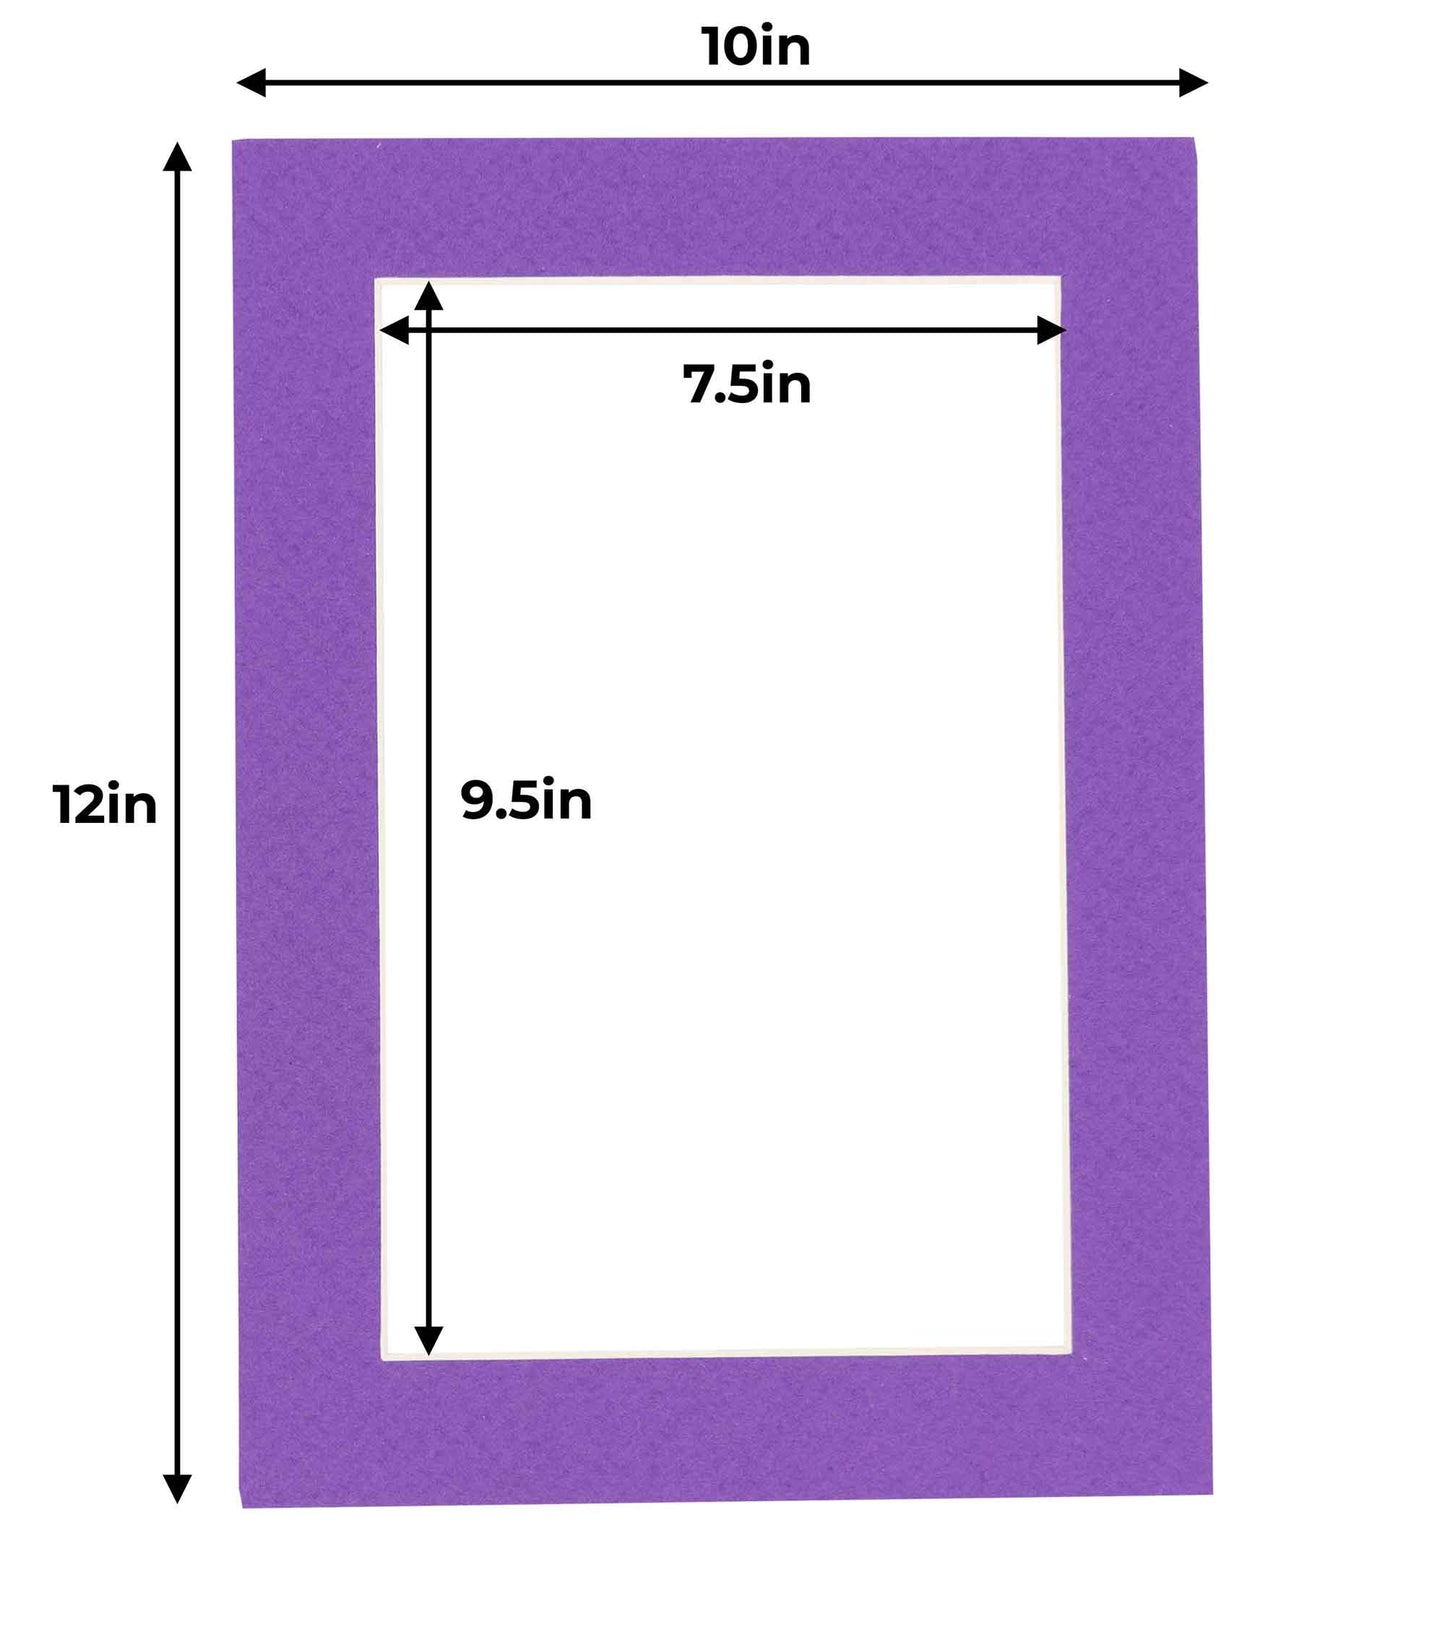 Pack of 10 Purple Precut Acid-Free Matboard Set with Clear Bags & Backings